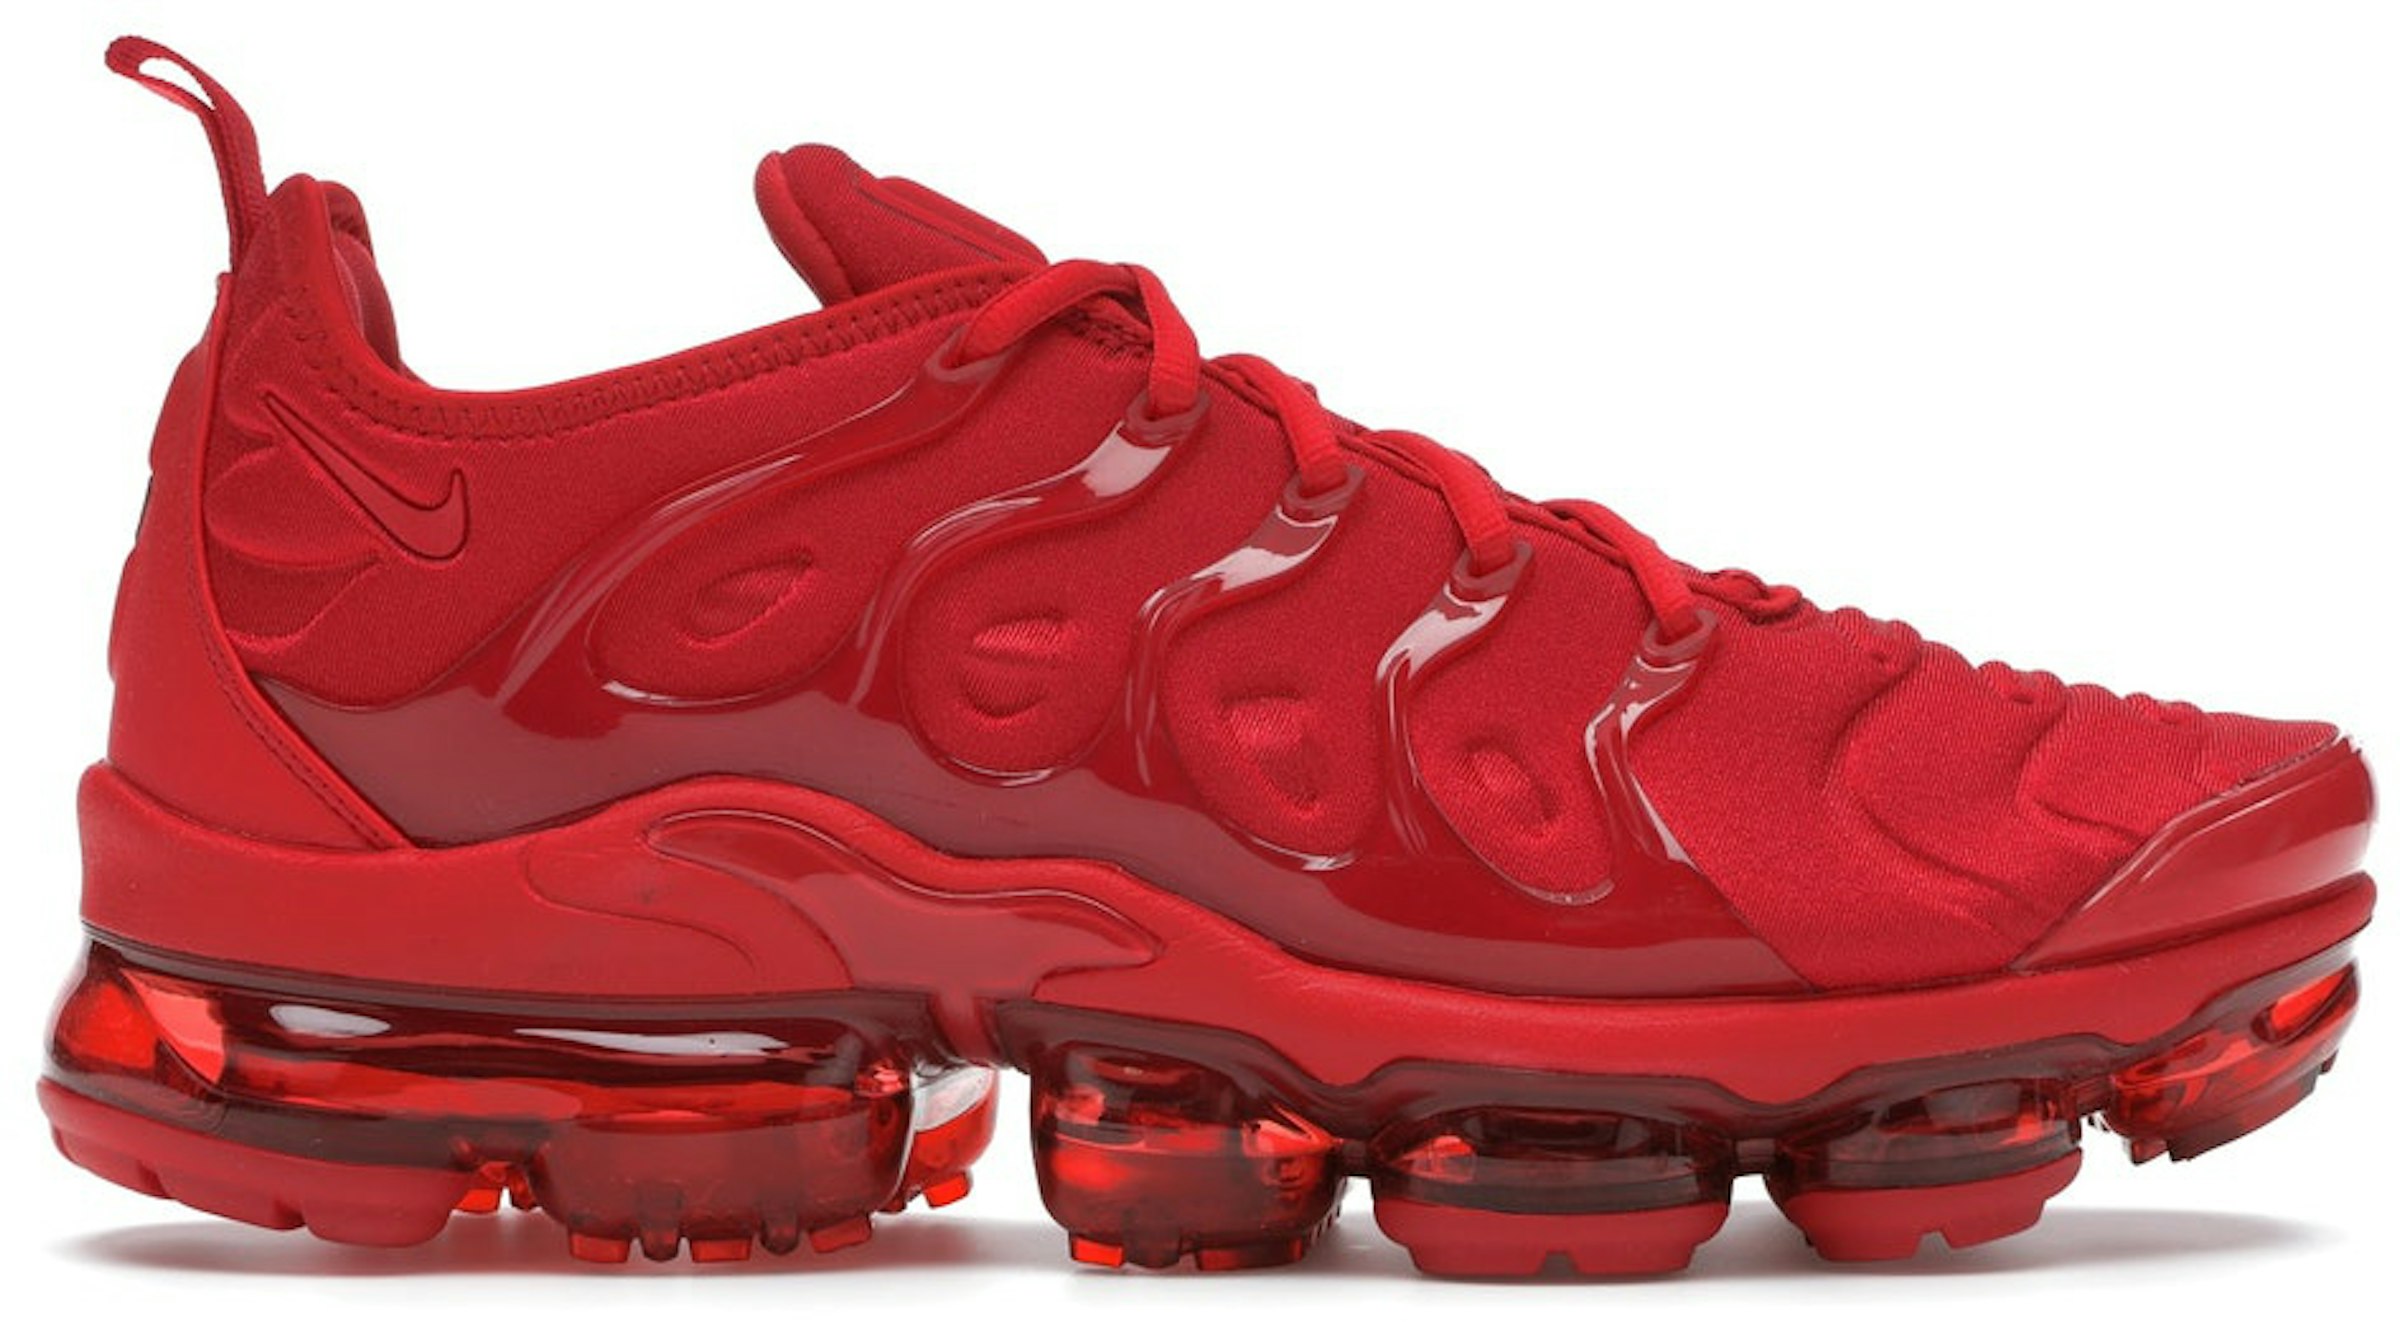 Buy Air Max VaporMax Shoes & New Sneakers StockX